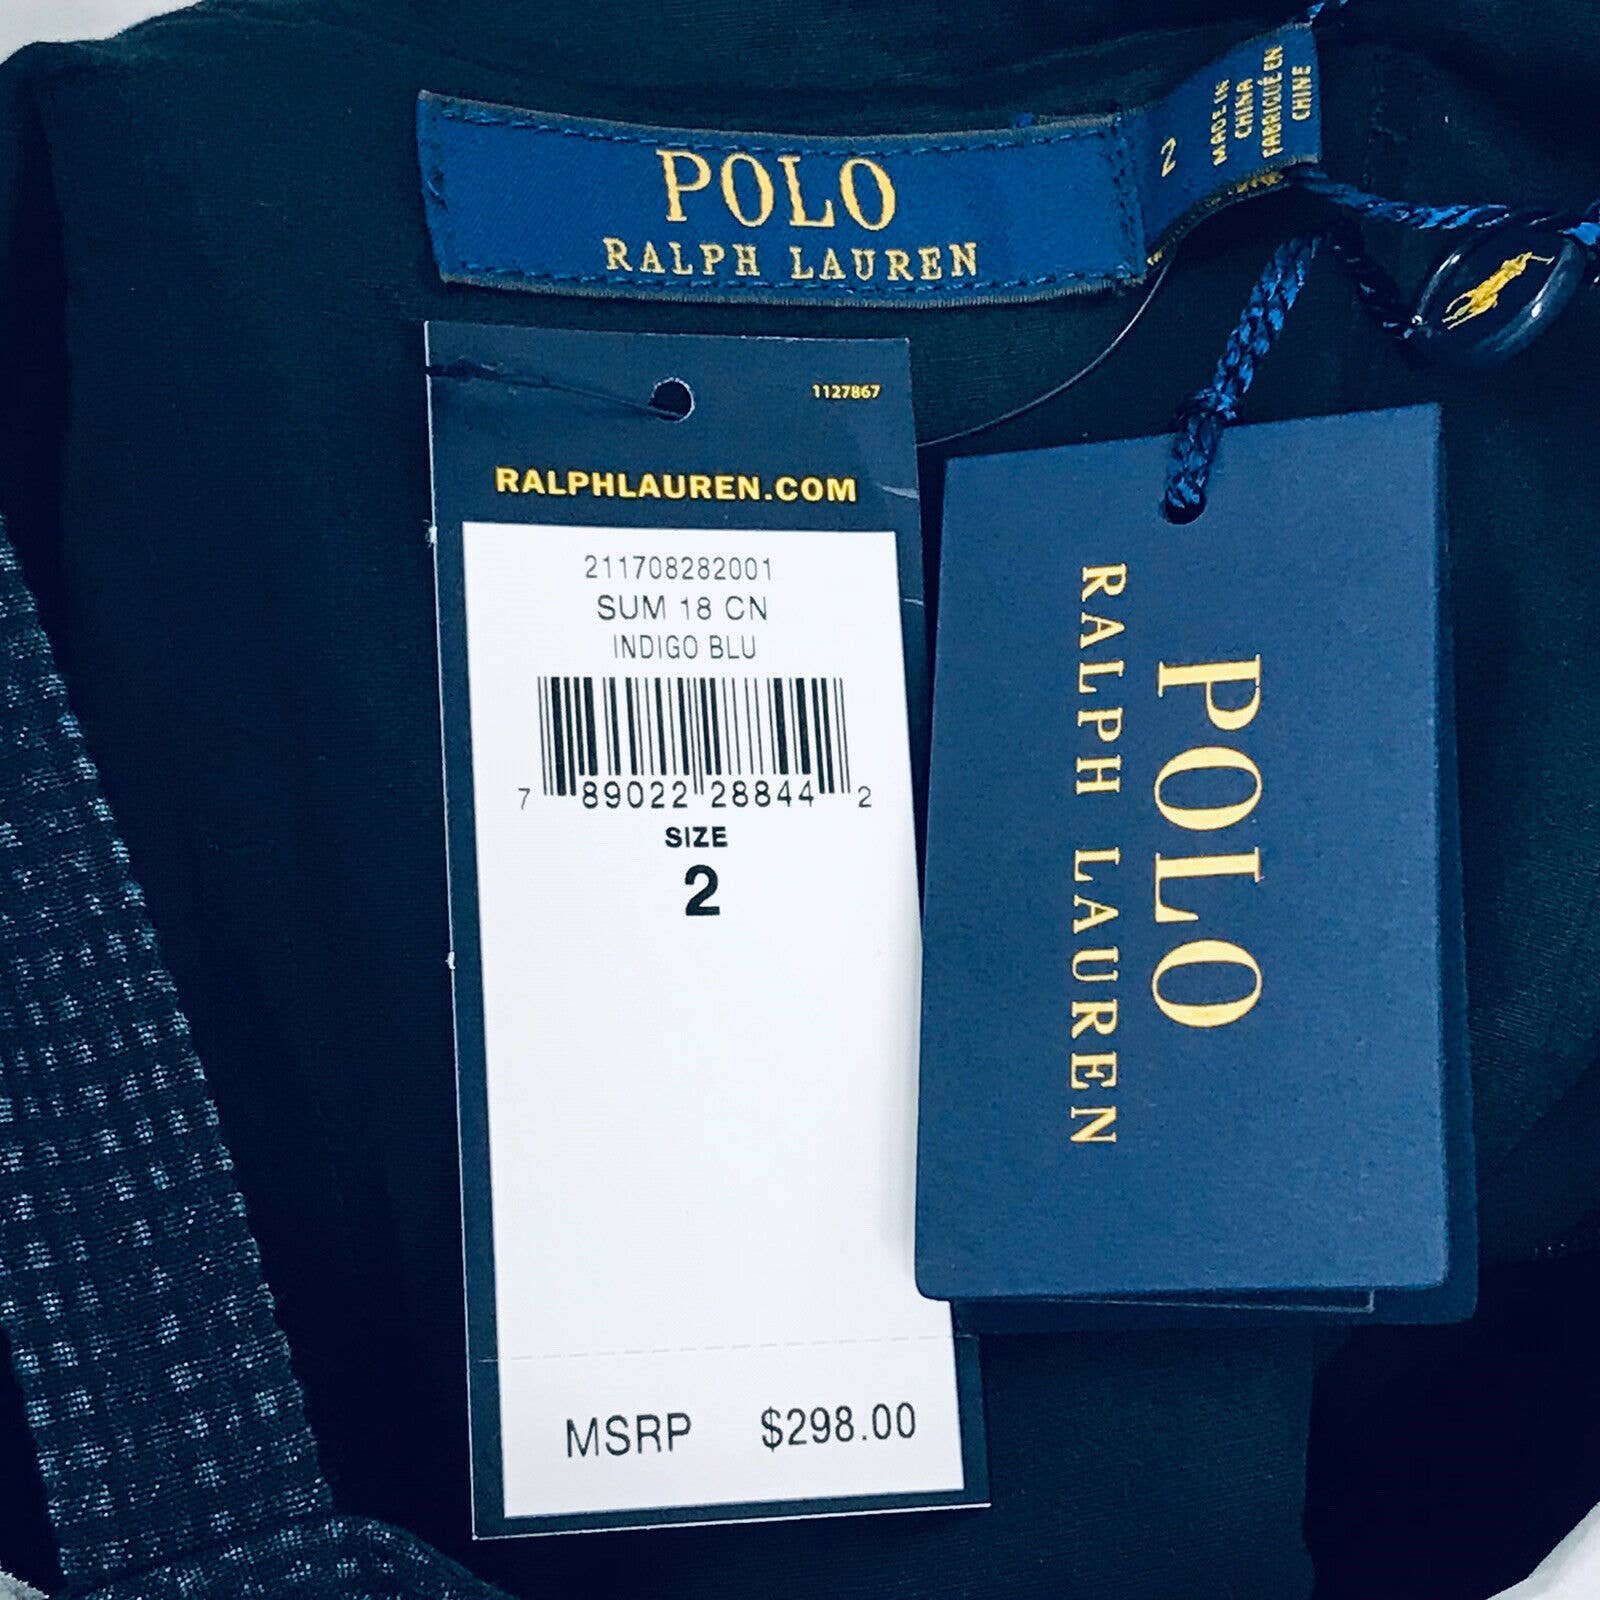 save up to 70% Polo Ralph Lauren 2 Dress Pockets $298 lbENTrXIA Buying Cheap